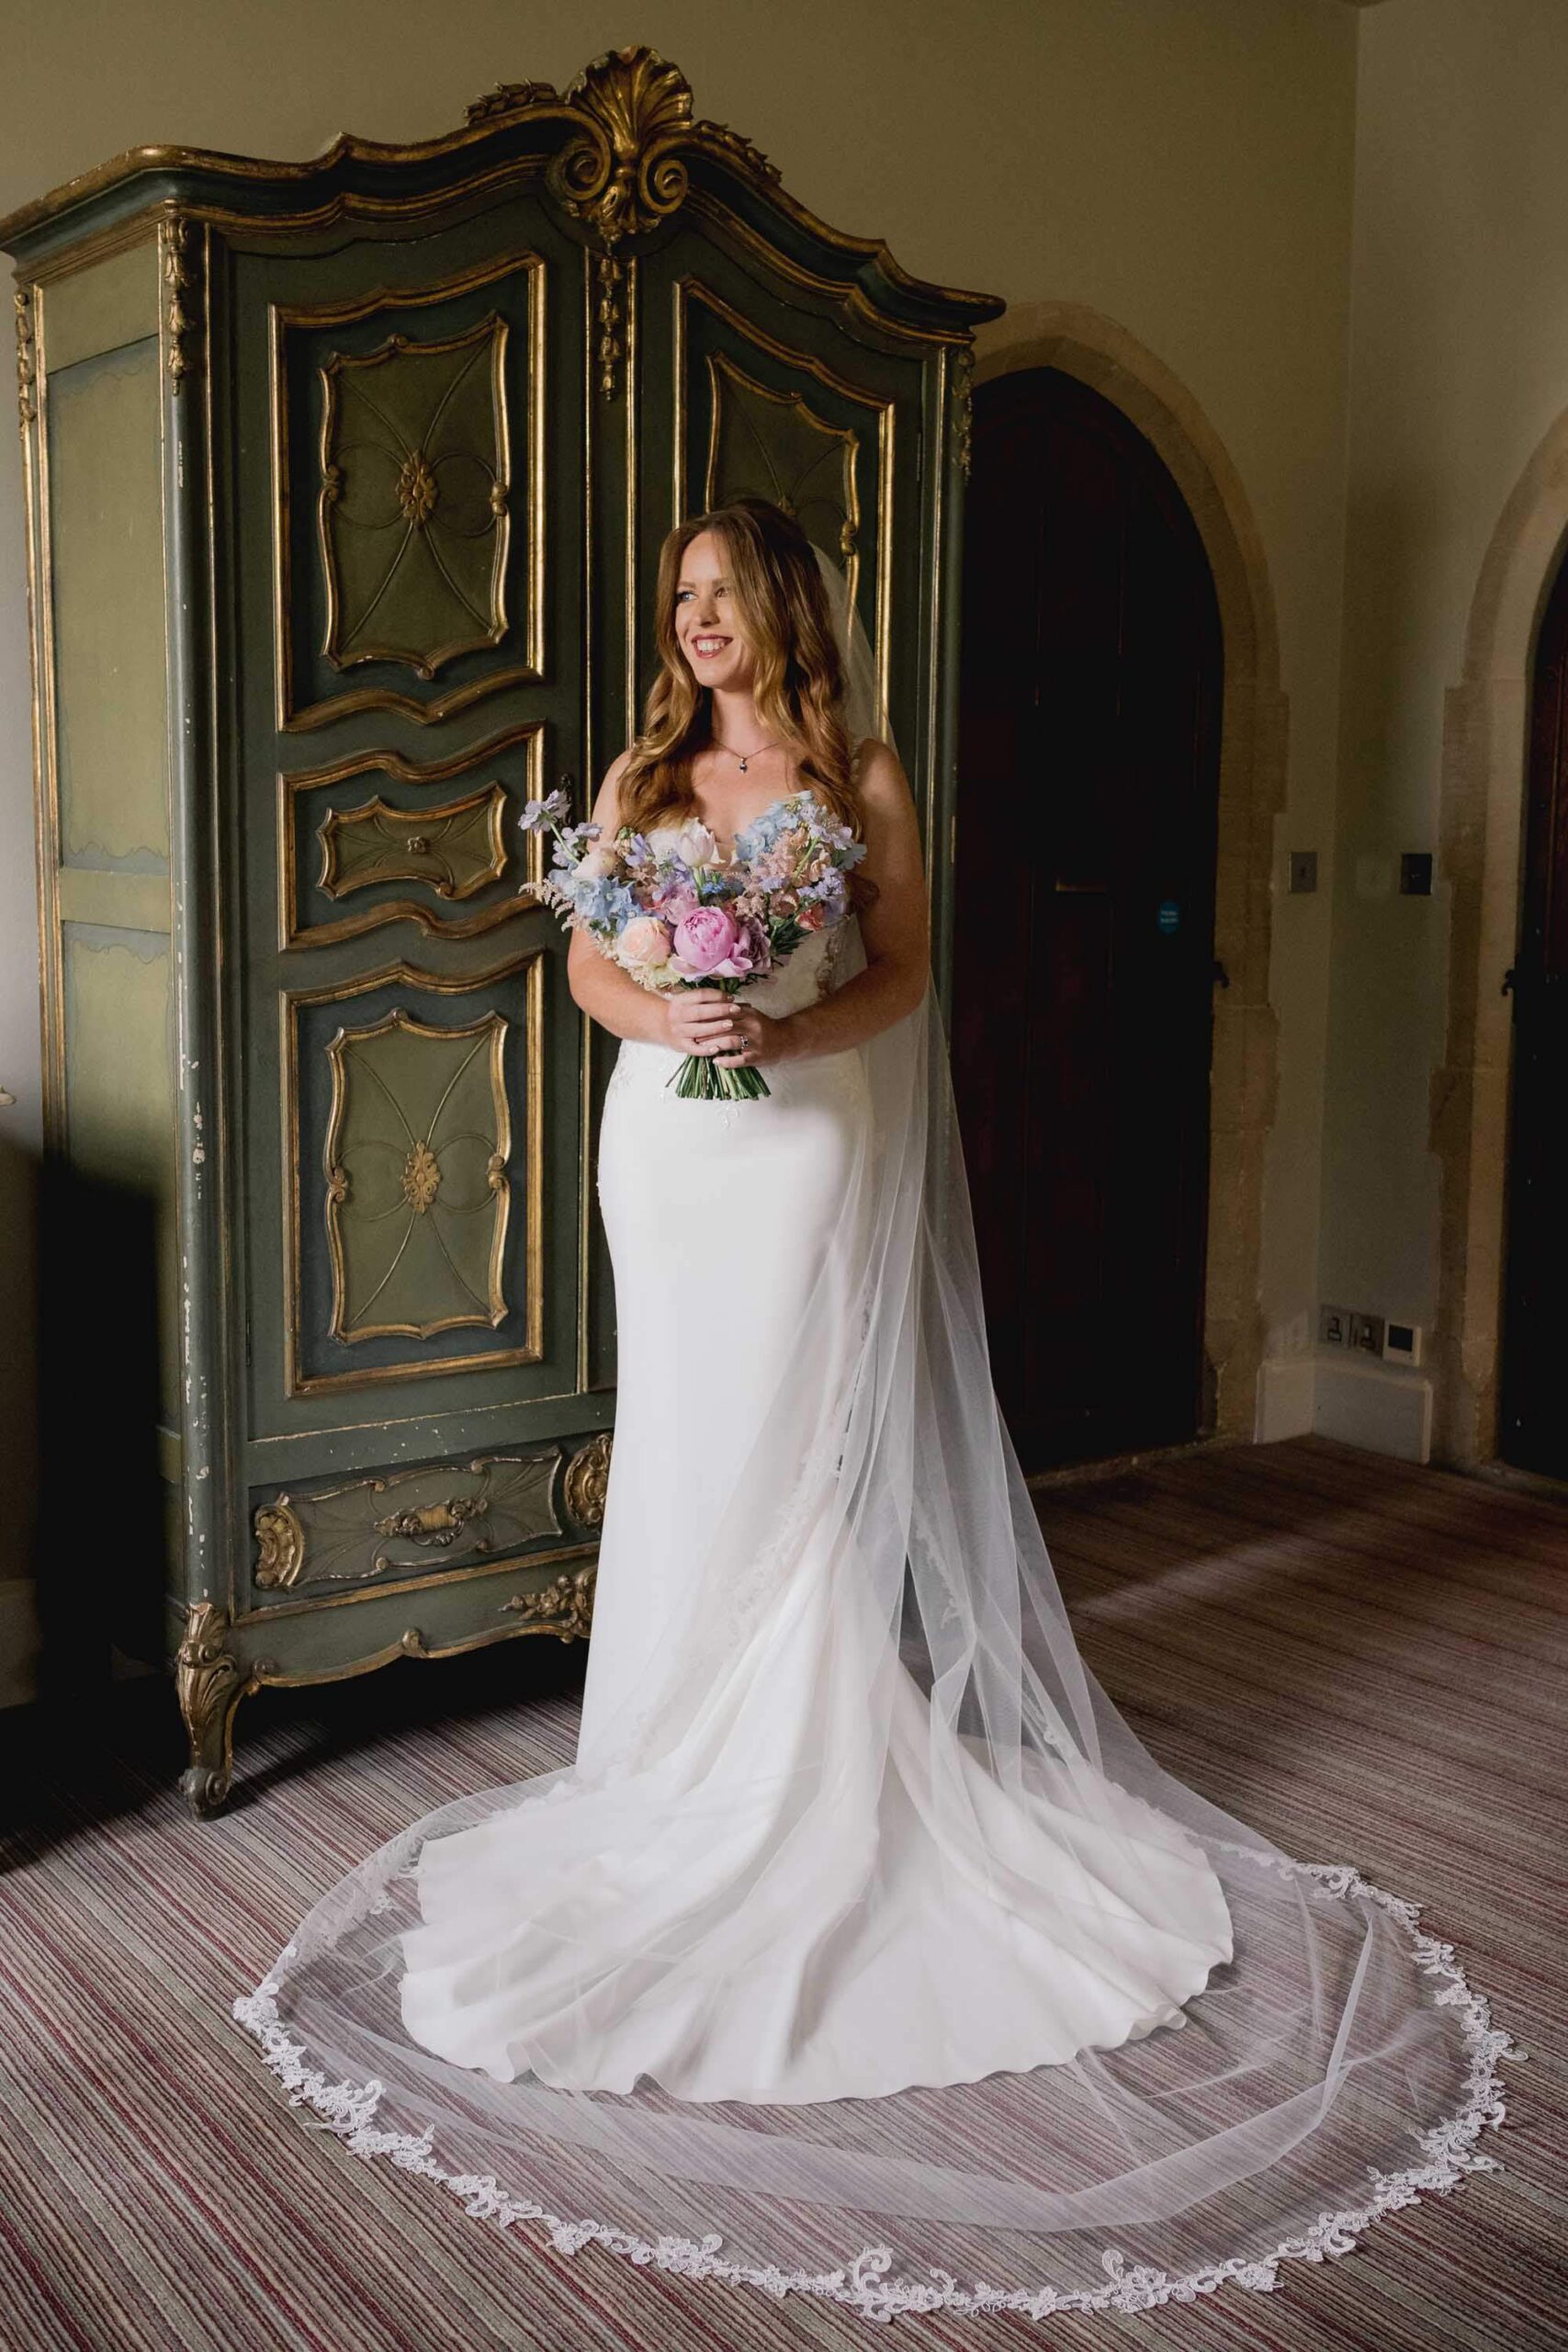 A bride in a beautiful wedding dress holding her bouquet of flowers at Amberley Castle in West Sussex.